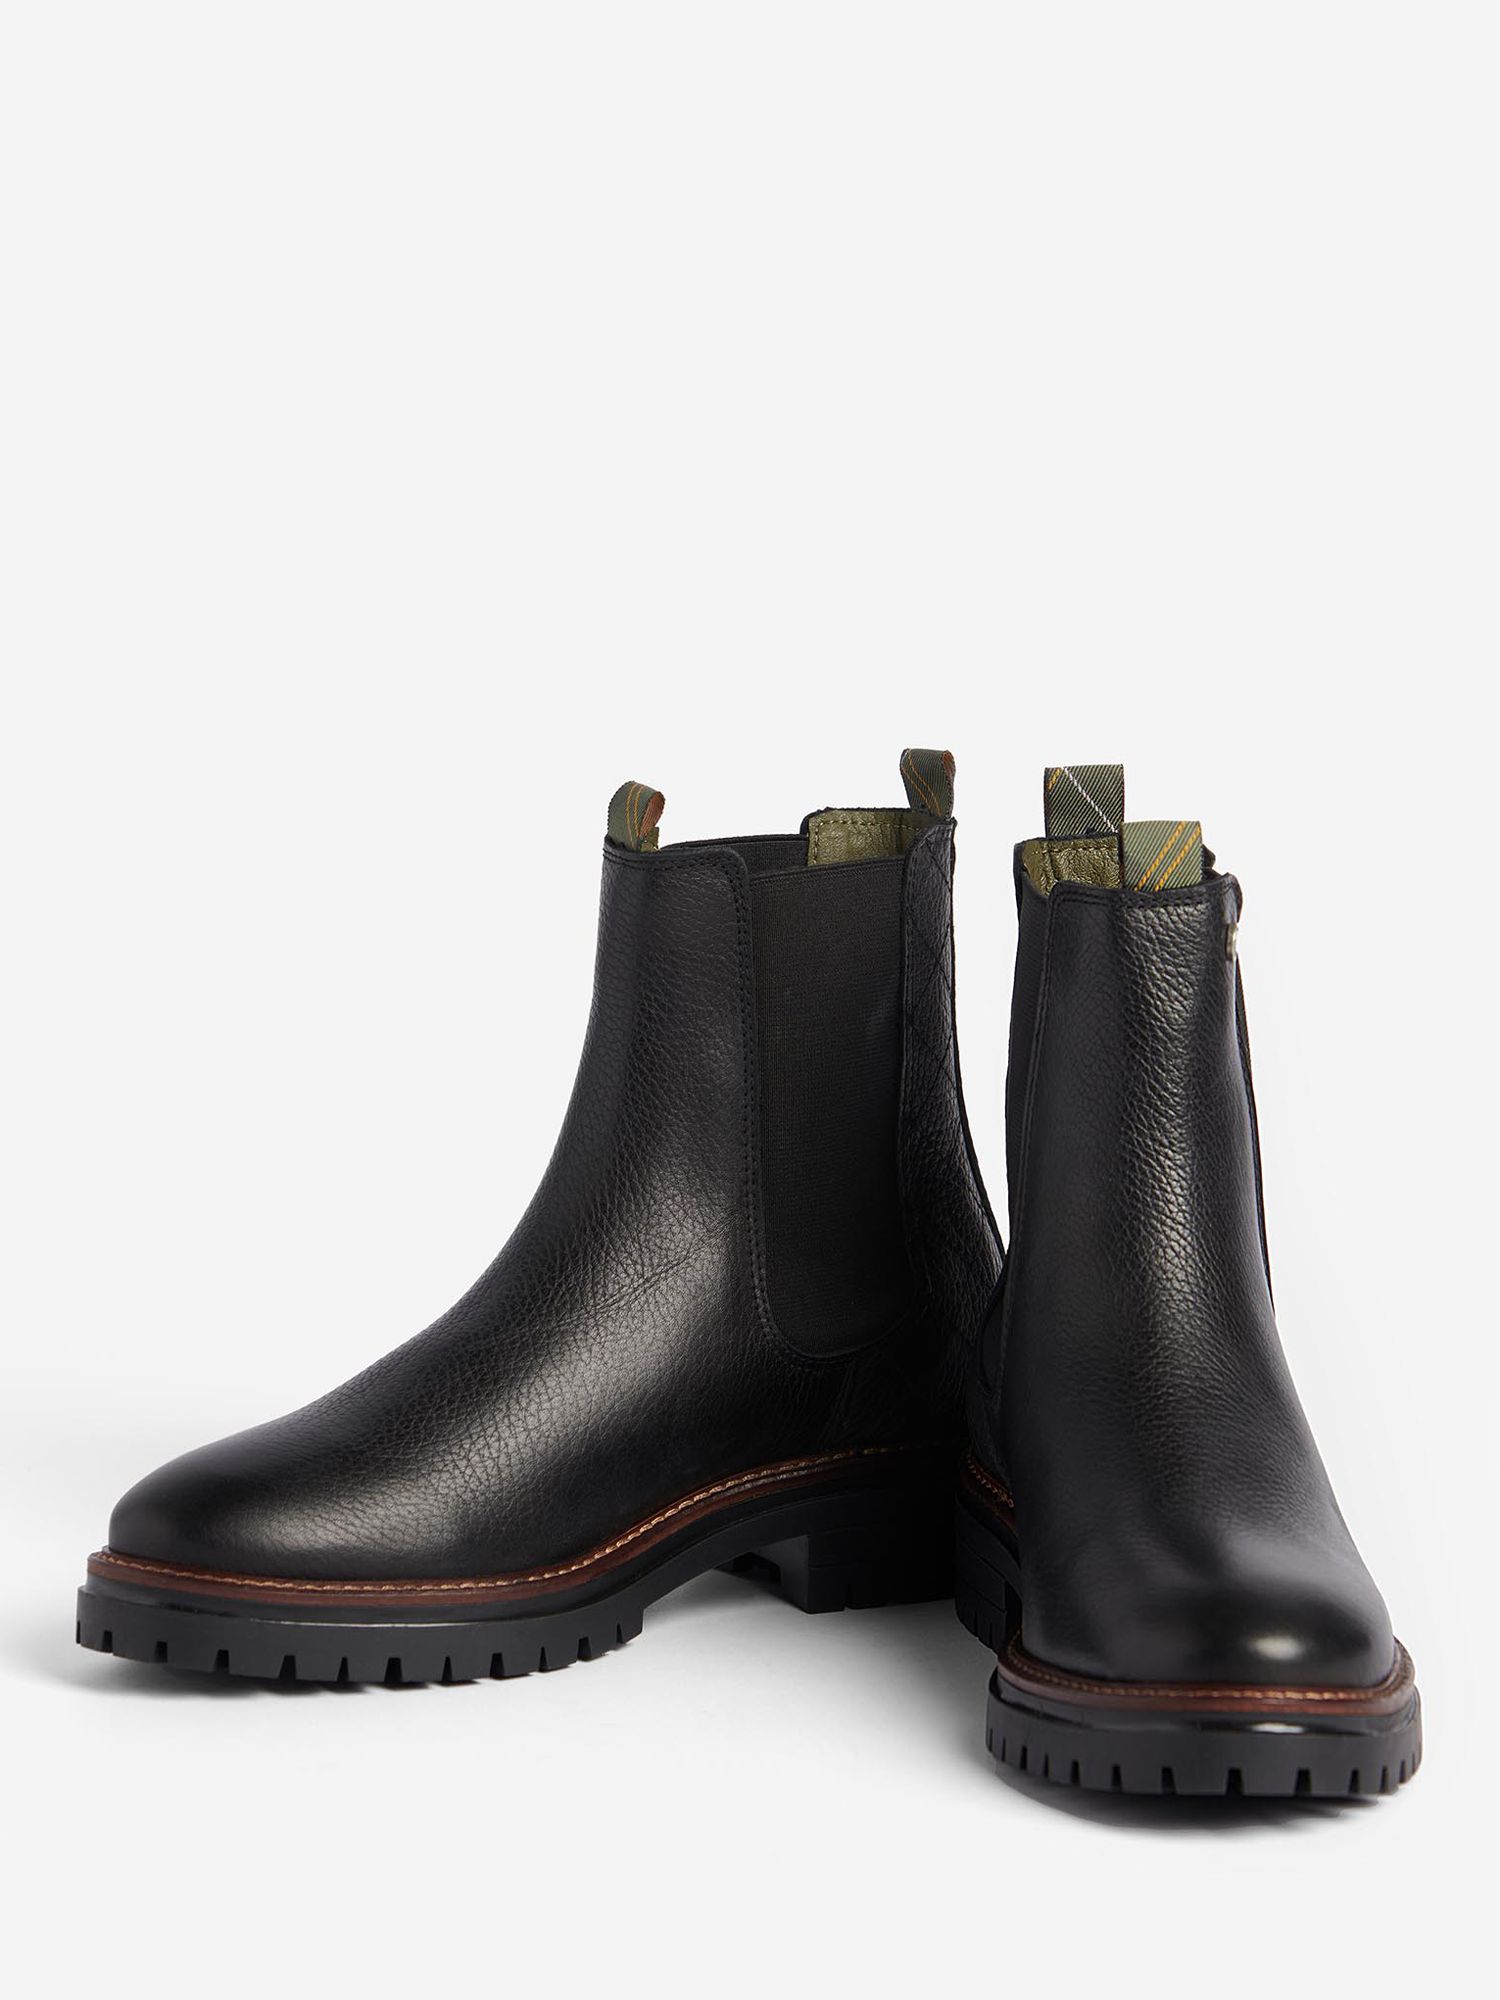 Barbour Evie Leather Chelsea Boots, Black at John Lewis & Partners